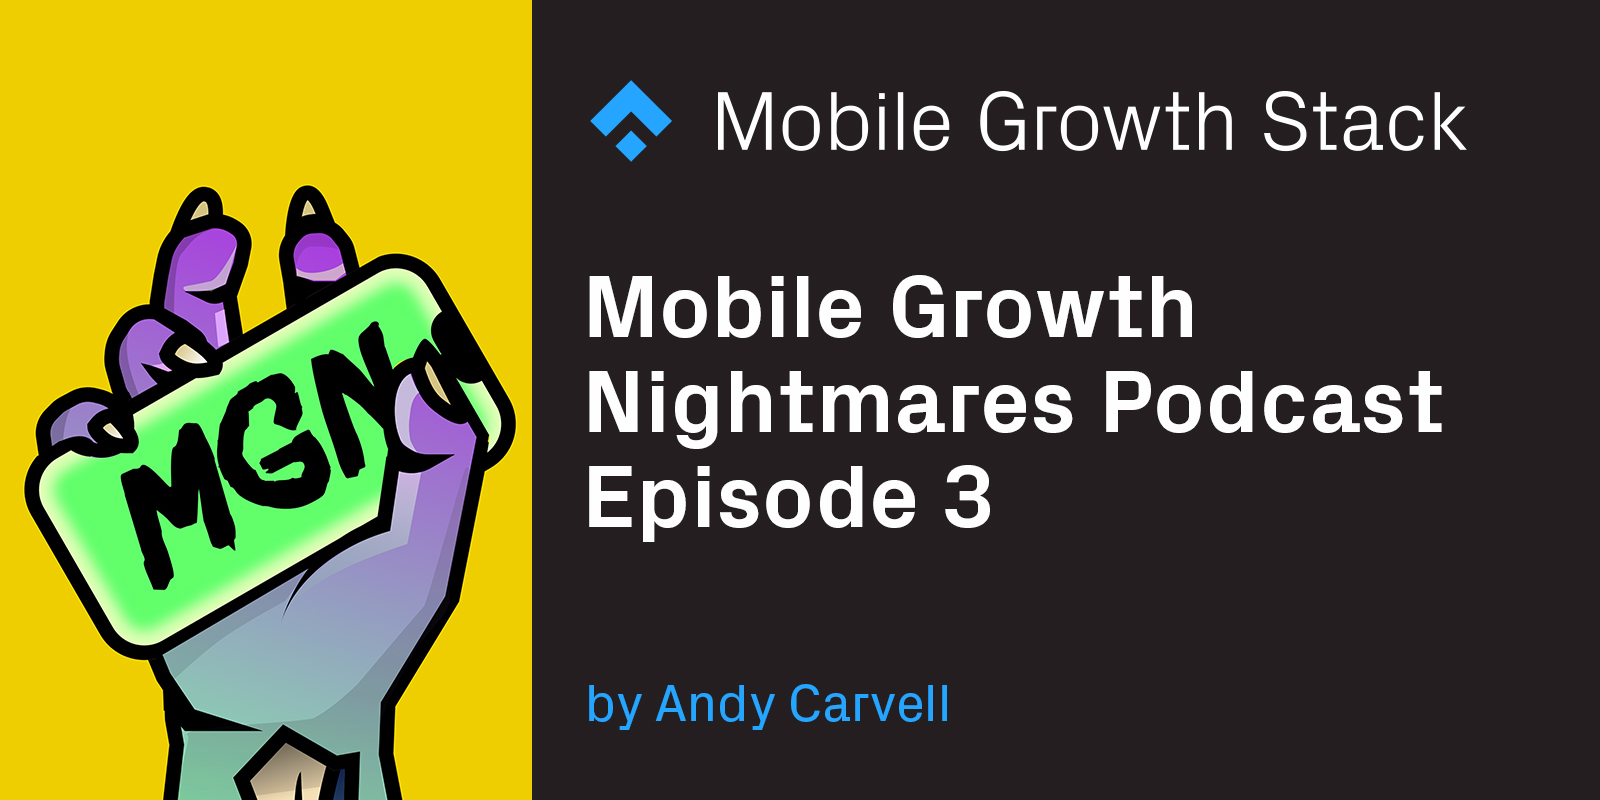 Mobile Growth Nightmares Episode 3 — starring Thomas Petit from 8Fit